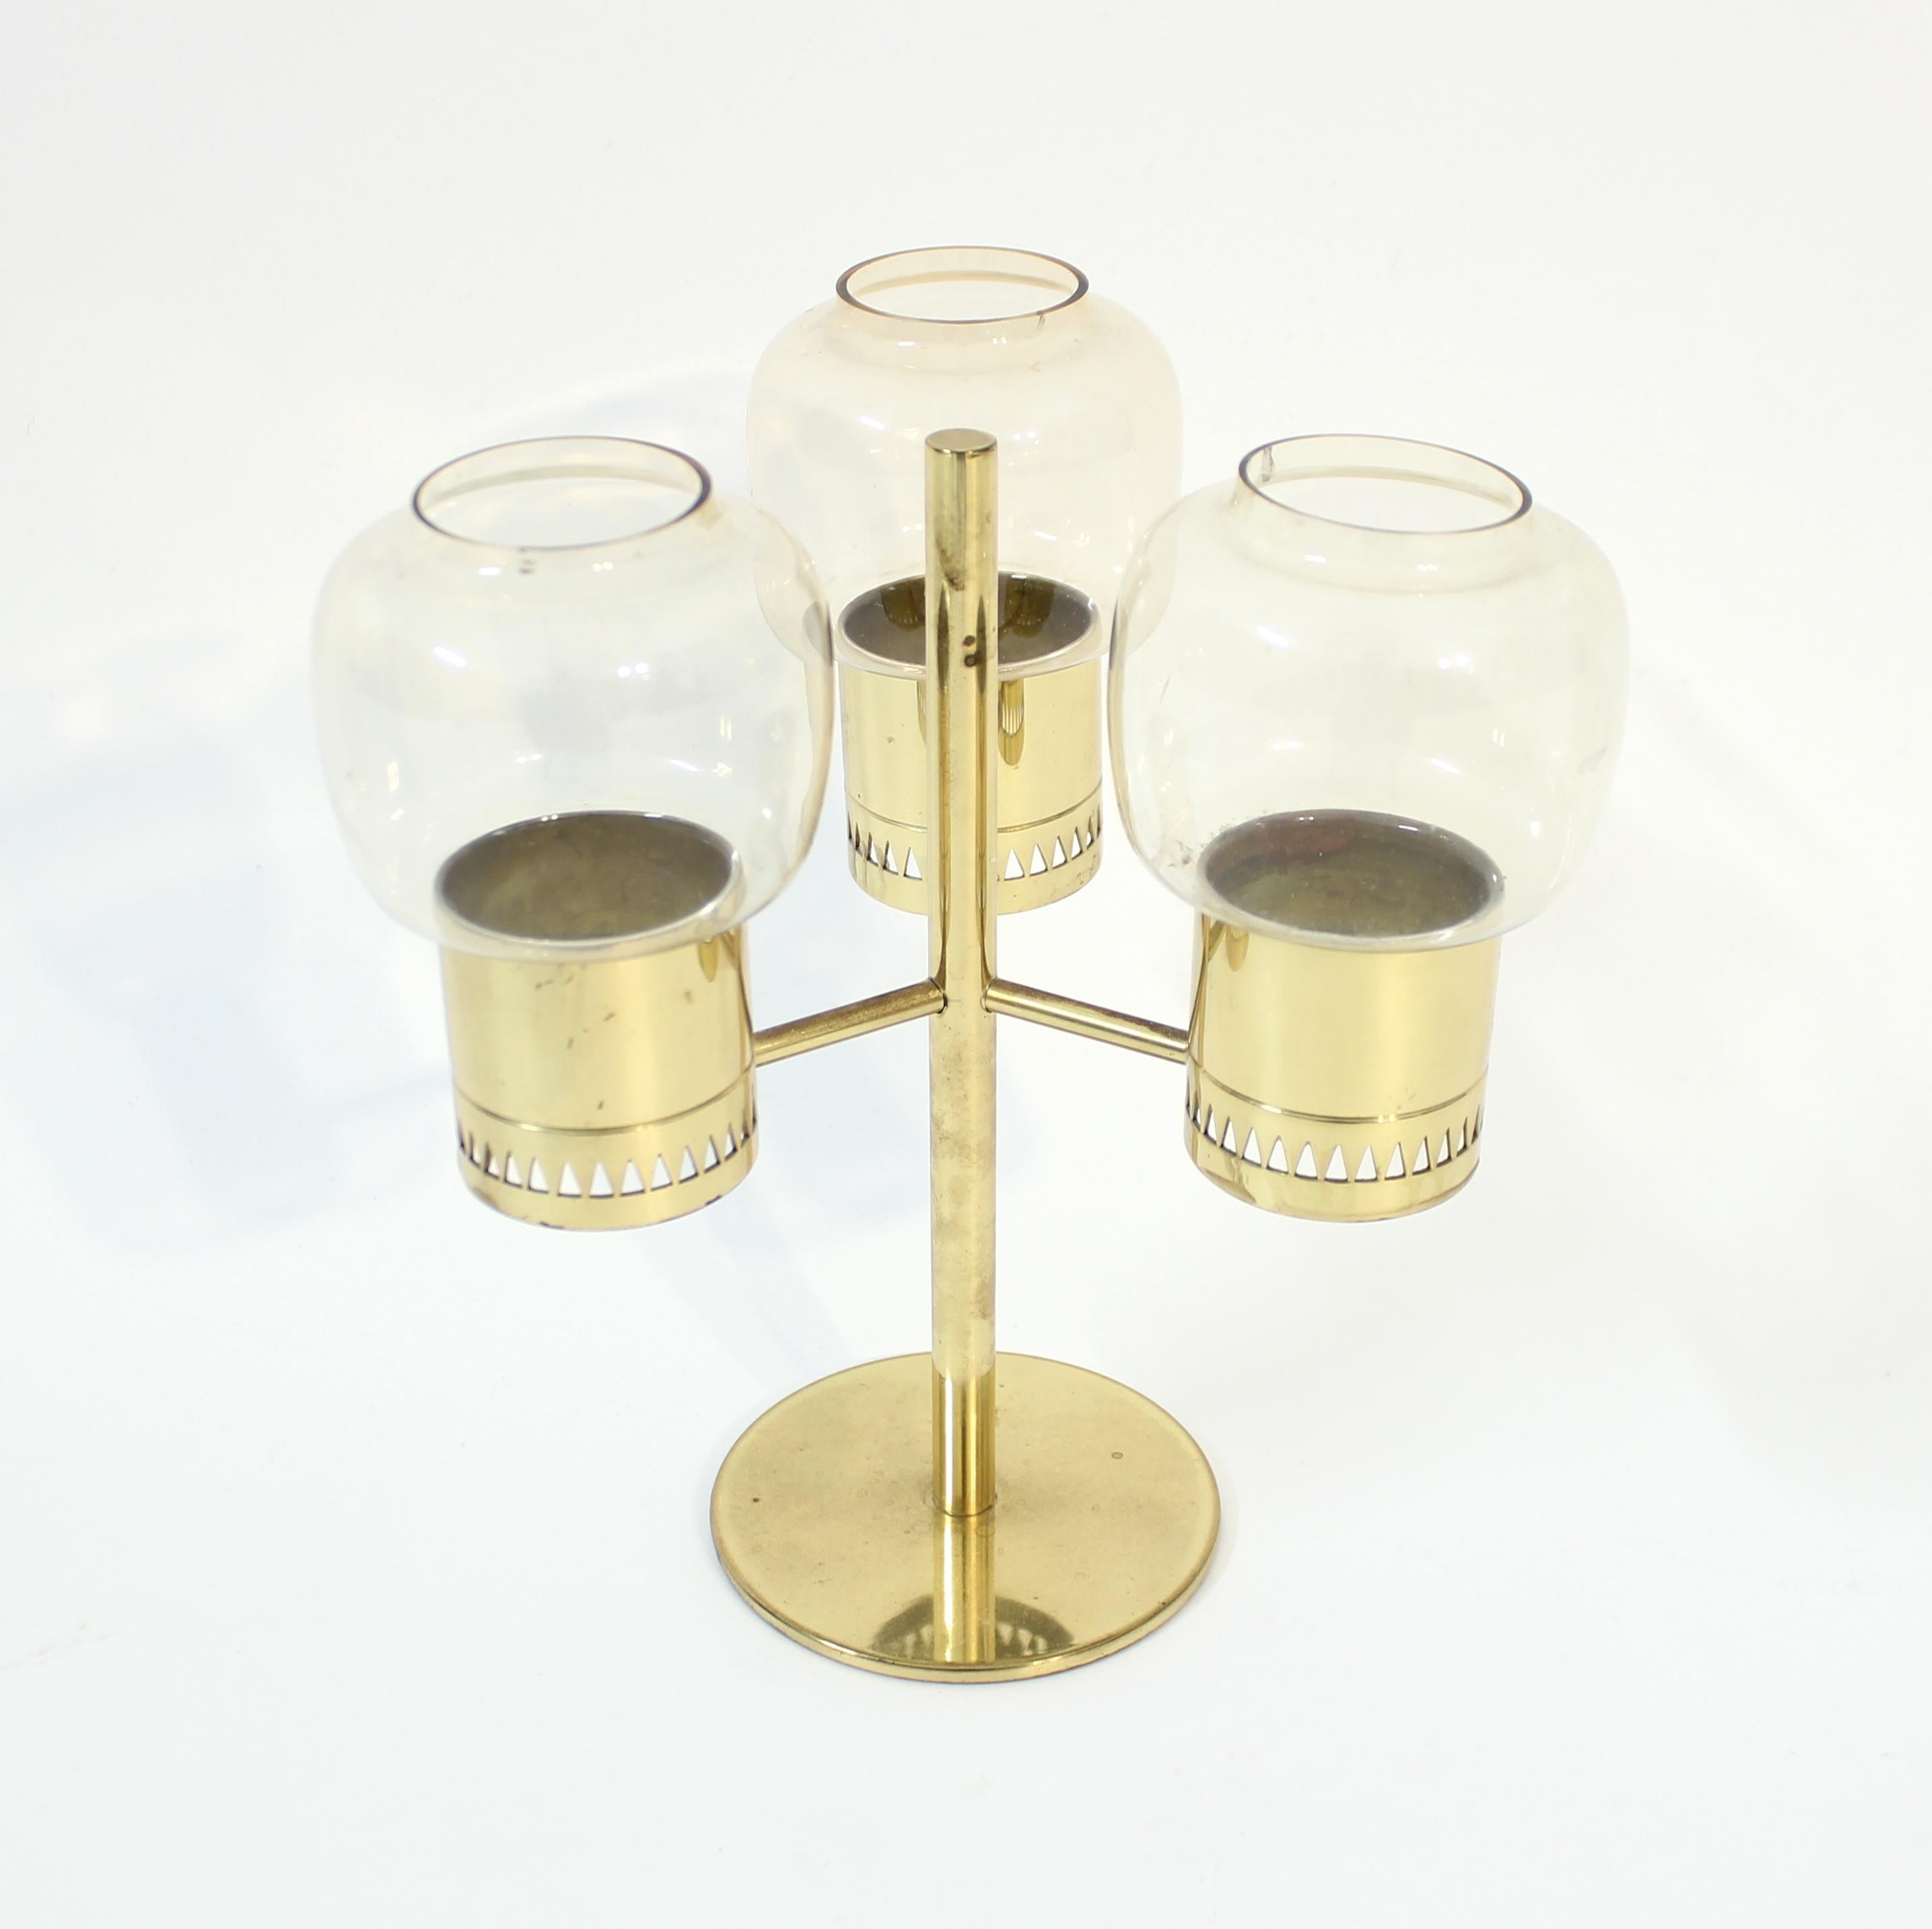 Candle holder for three candles, model L-67, designed by Hans-Agne Jakobsson for his own company  Hans-Agne Jakobsson AB in the 1960s. It contains three clear / smoke coloured glass bulbs on a brass base. Very good vintage condition with light ware